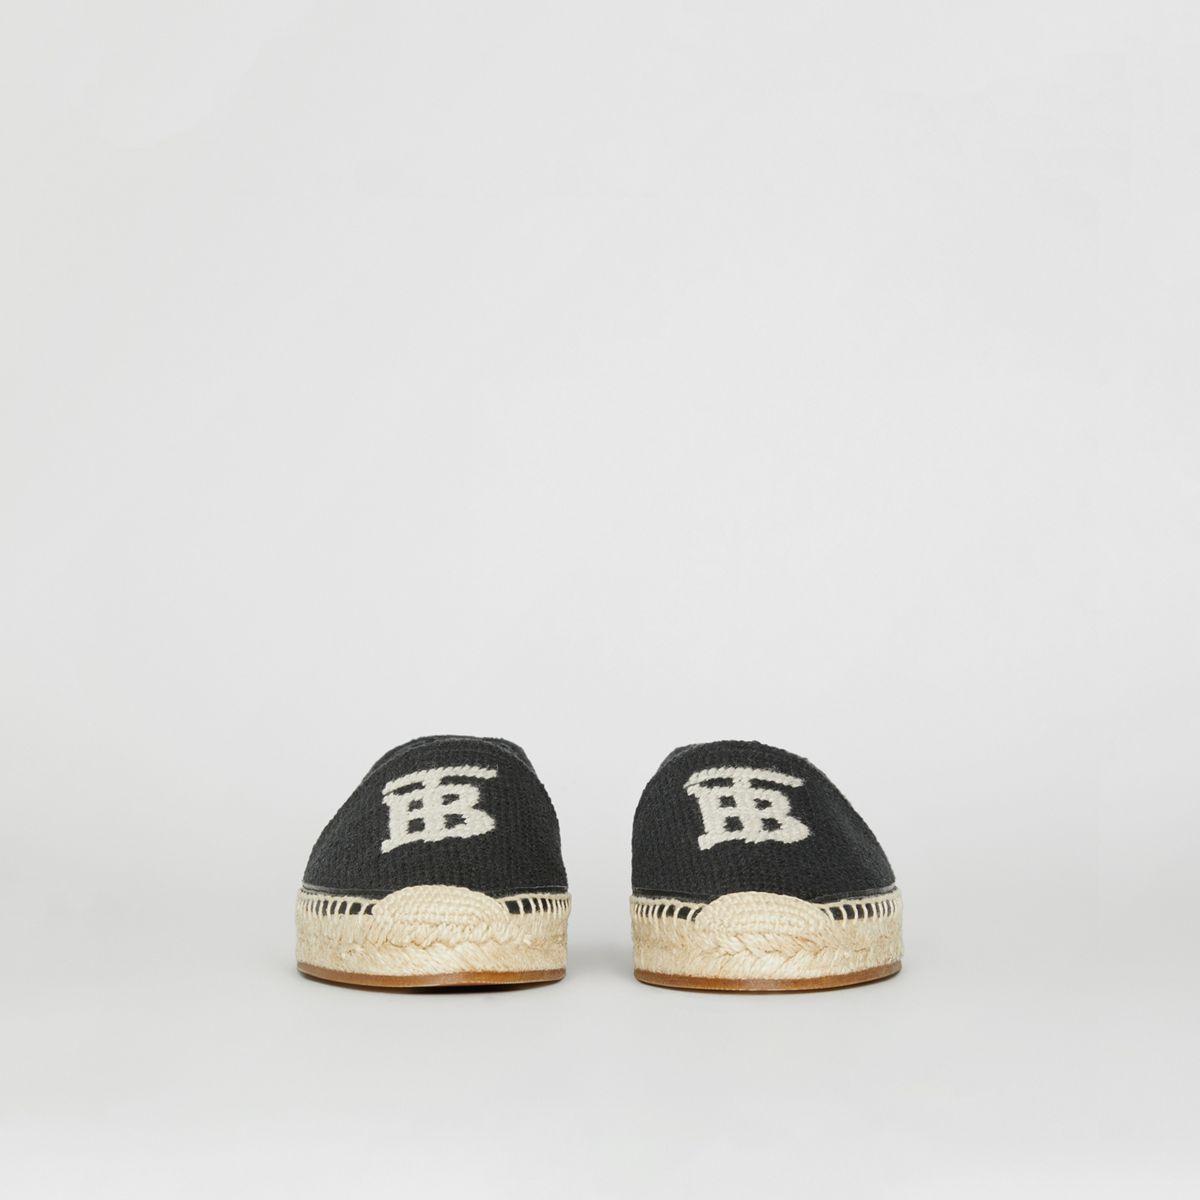 Burberry Monogram Motif Cotton And Leather Espadrilles in Black/White  (Black) | Lyst